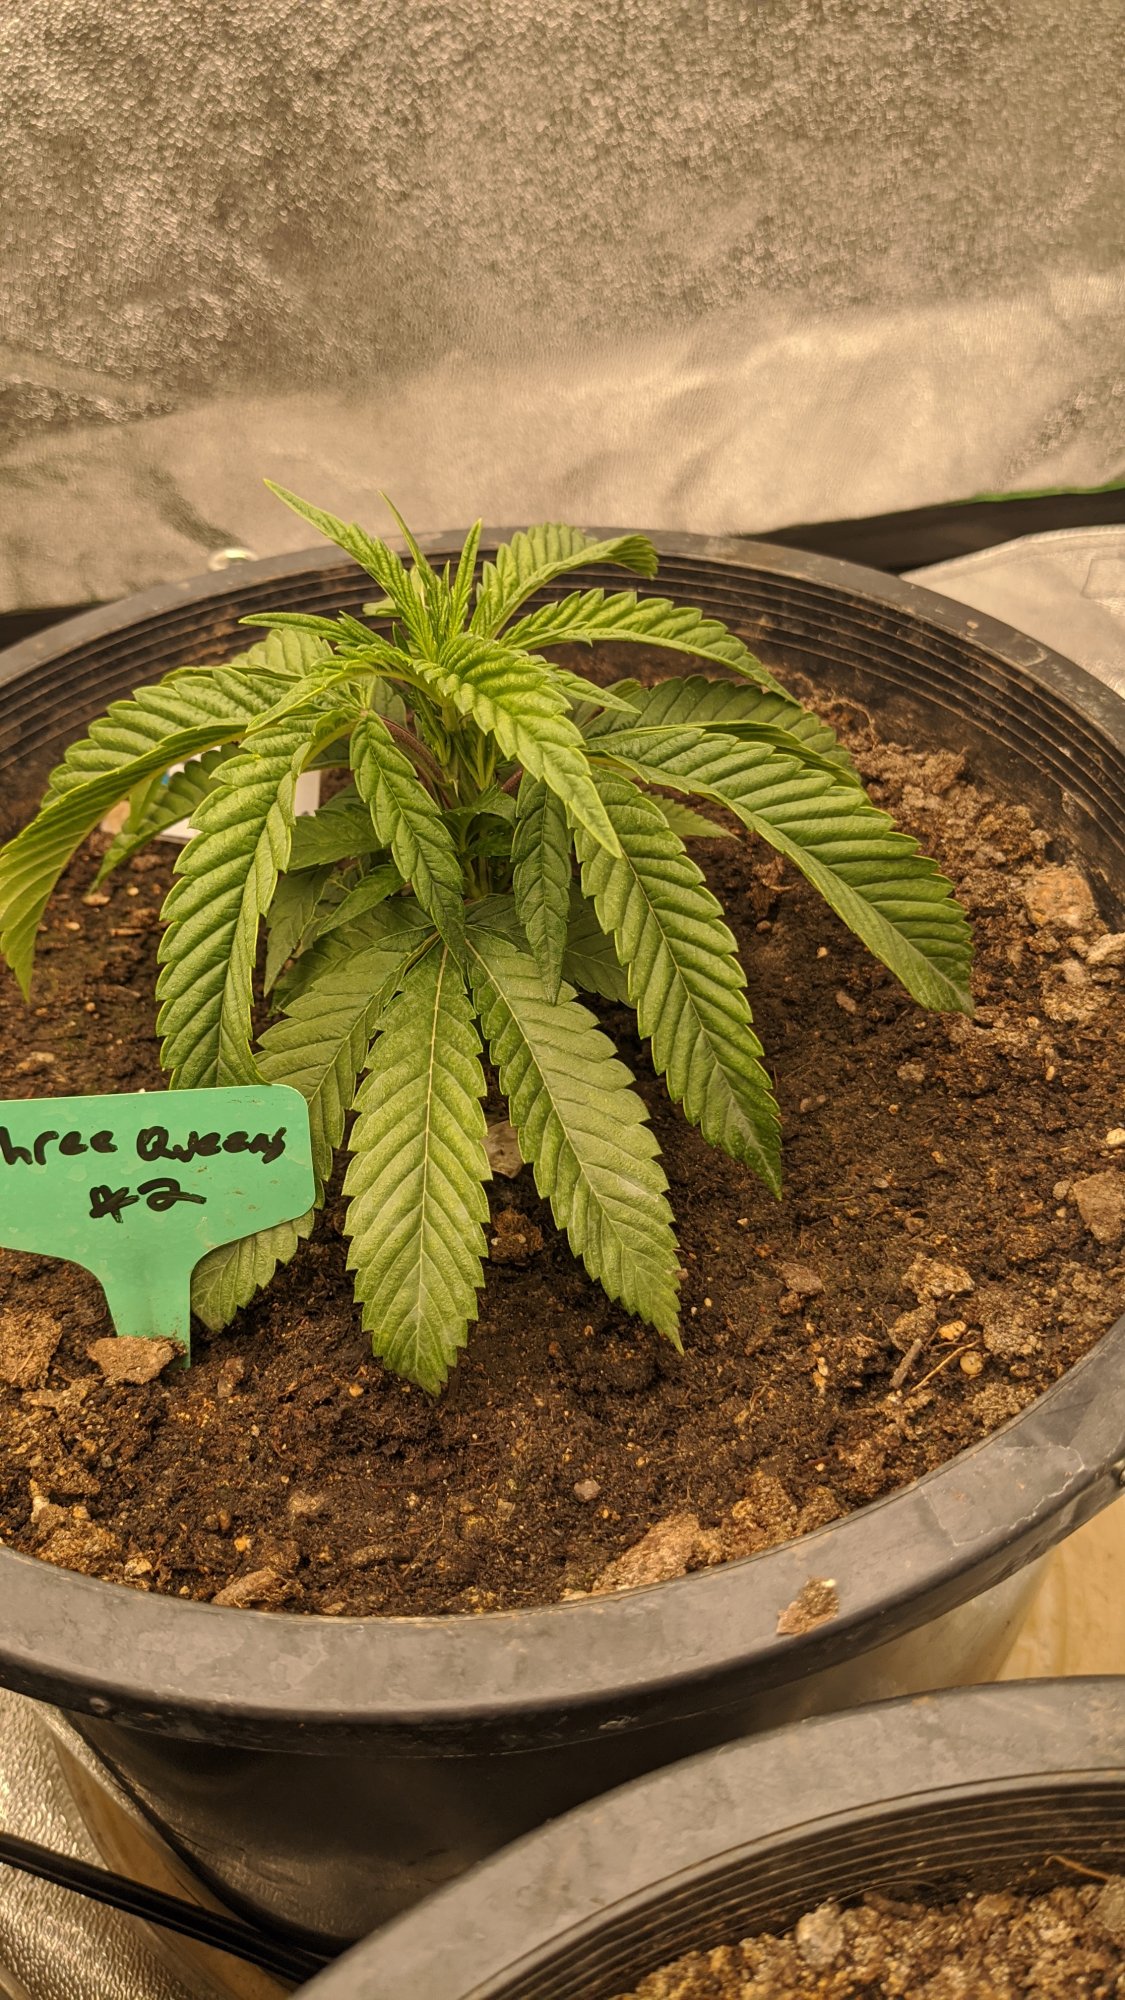 My current grow is having some issues 2